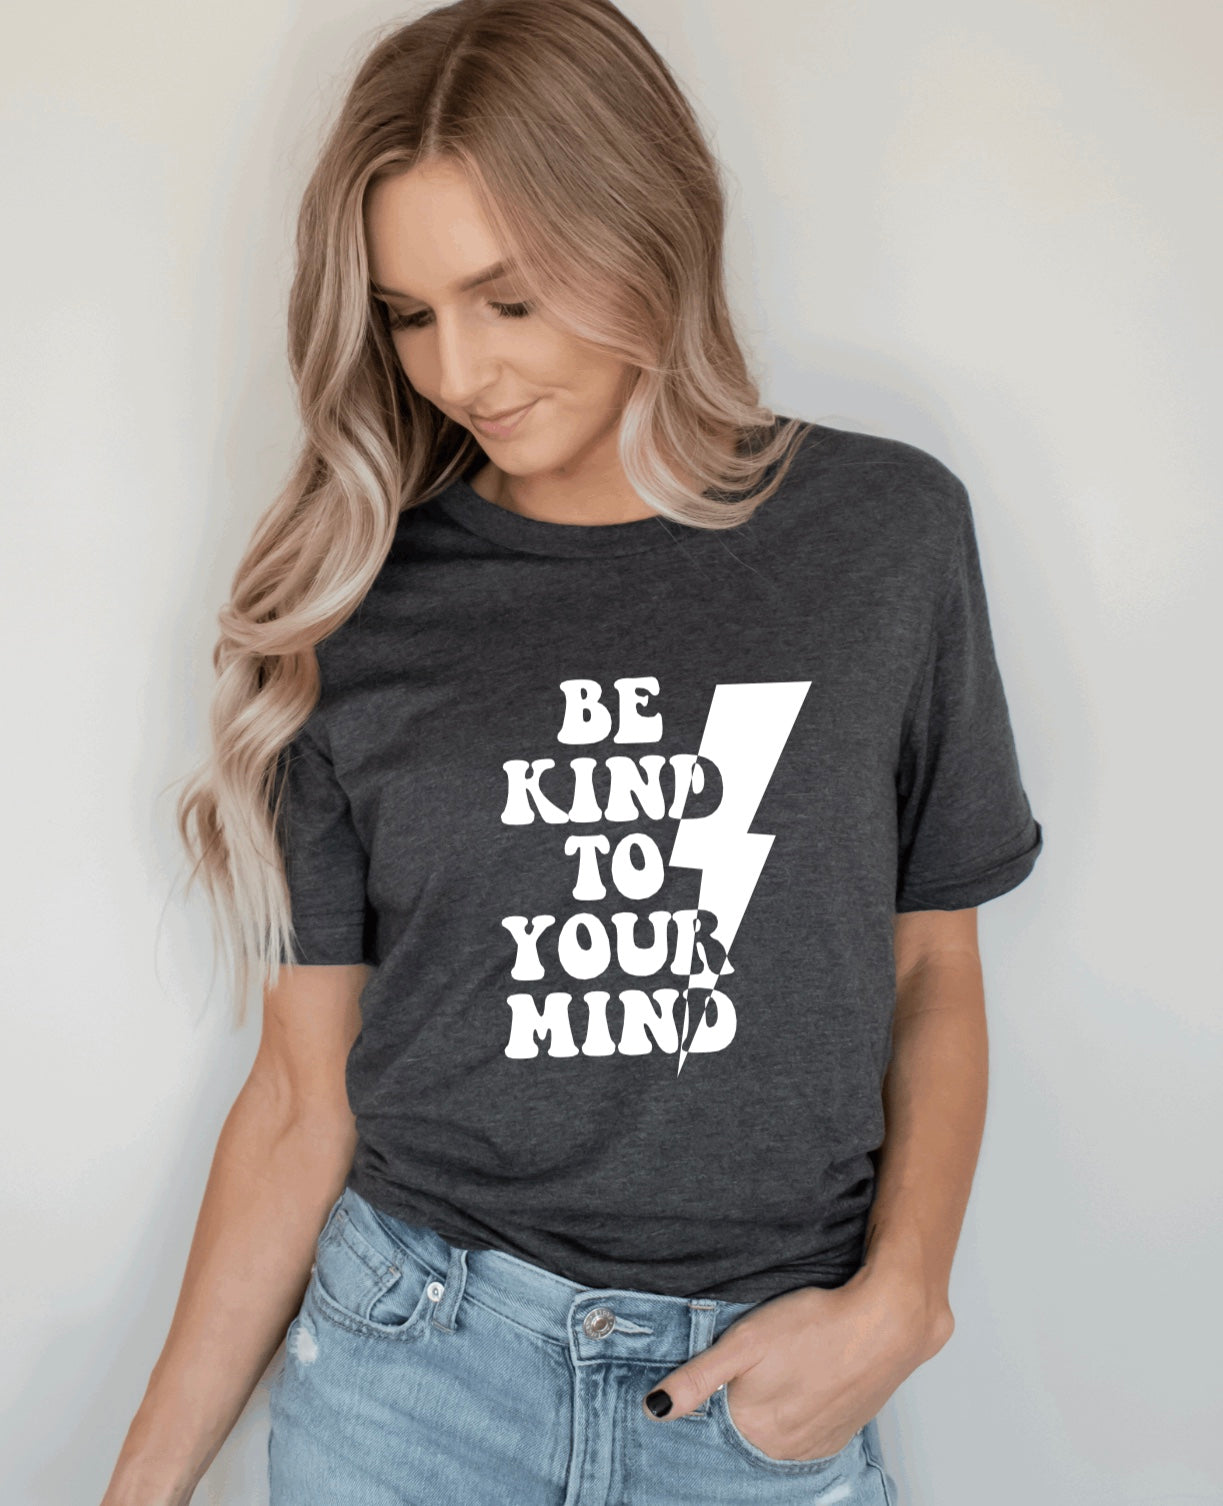 Be kind to your mind t-shirt 